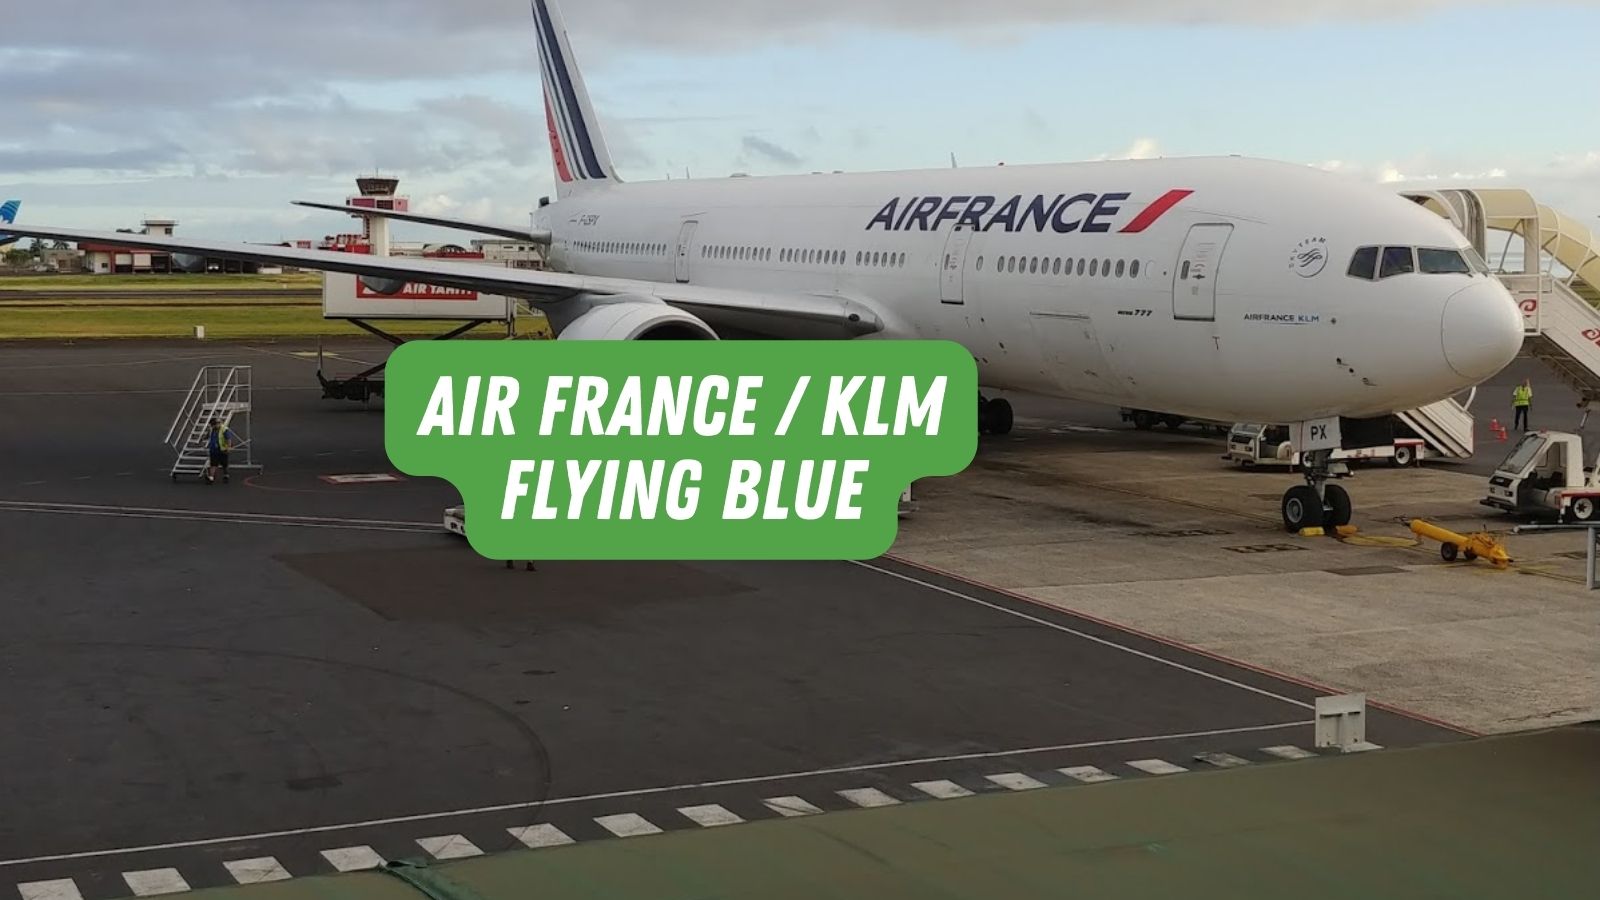 Air France/KLM Flying Blue: Free stopovers on award tickets coming soon